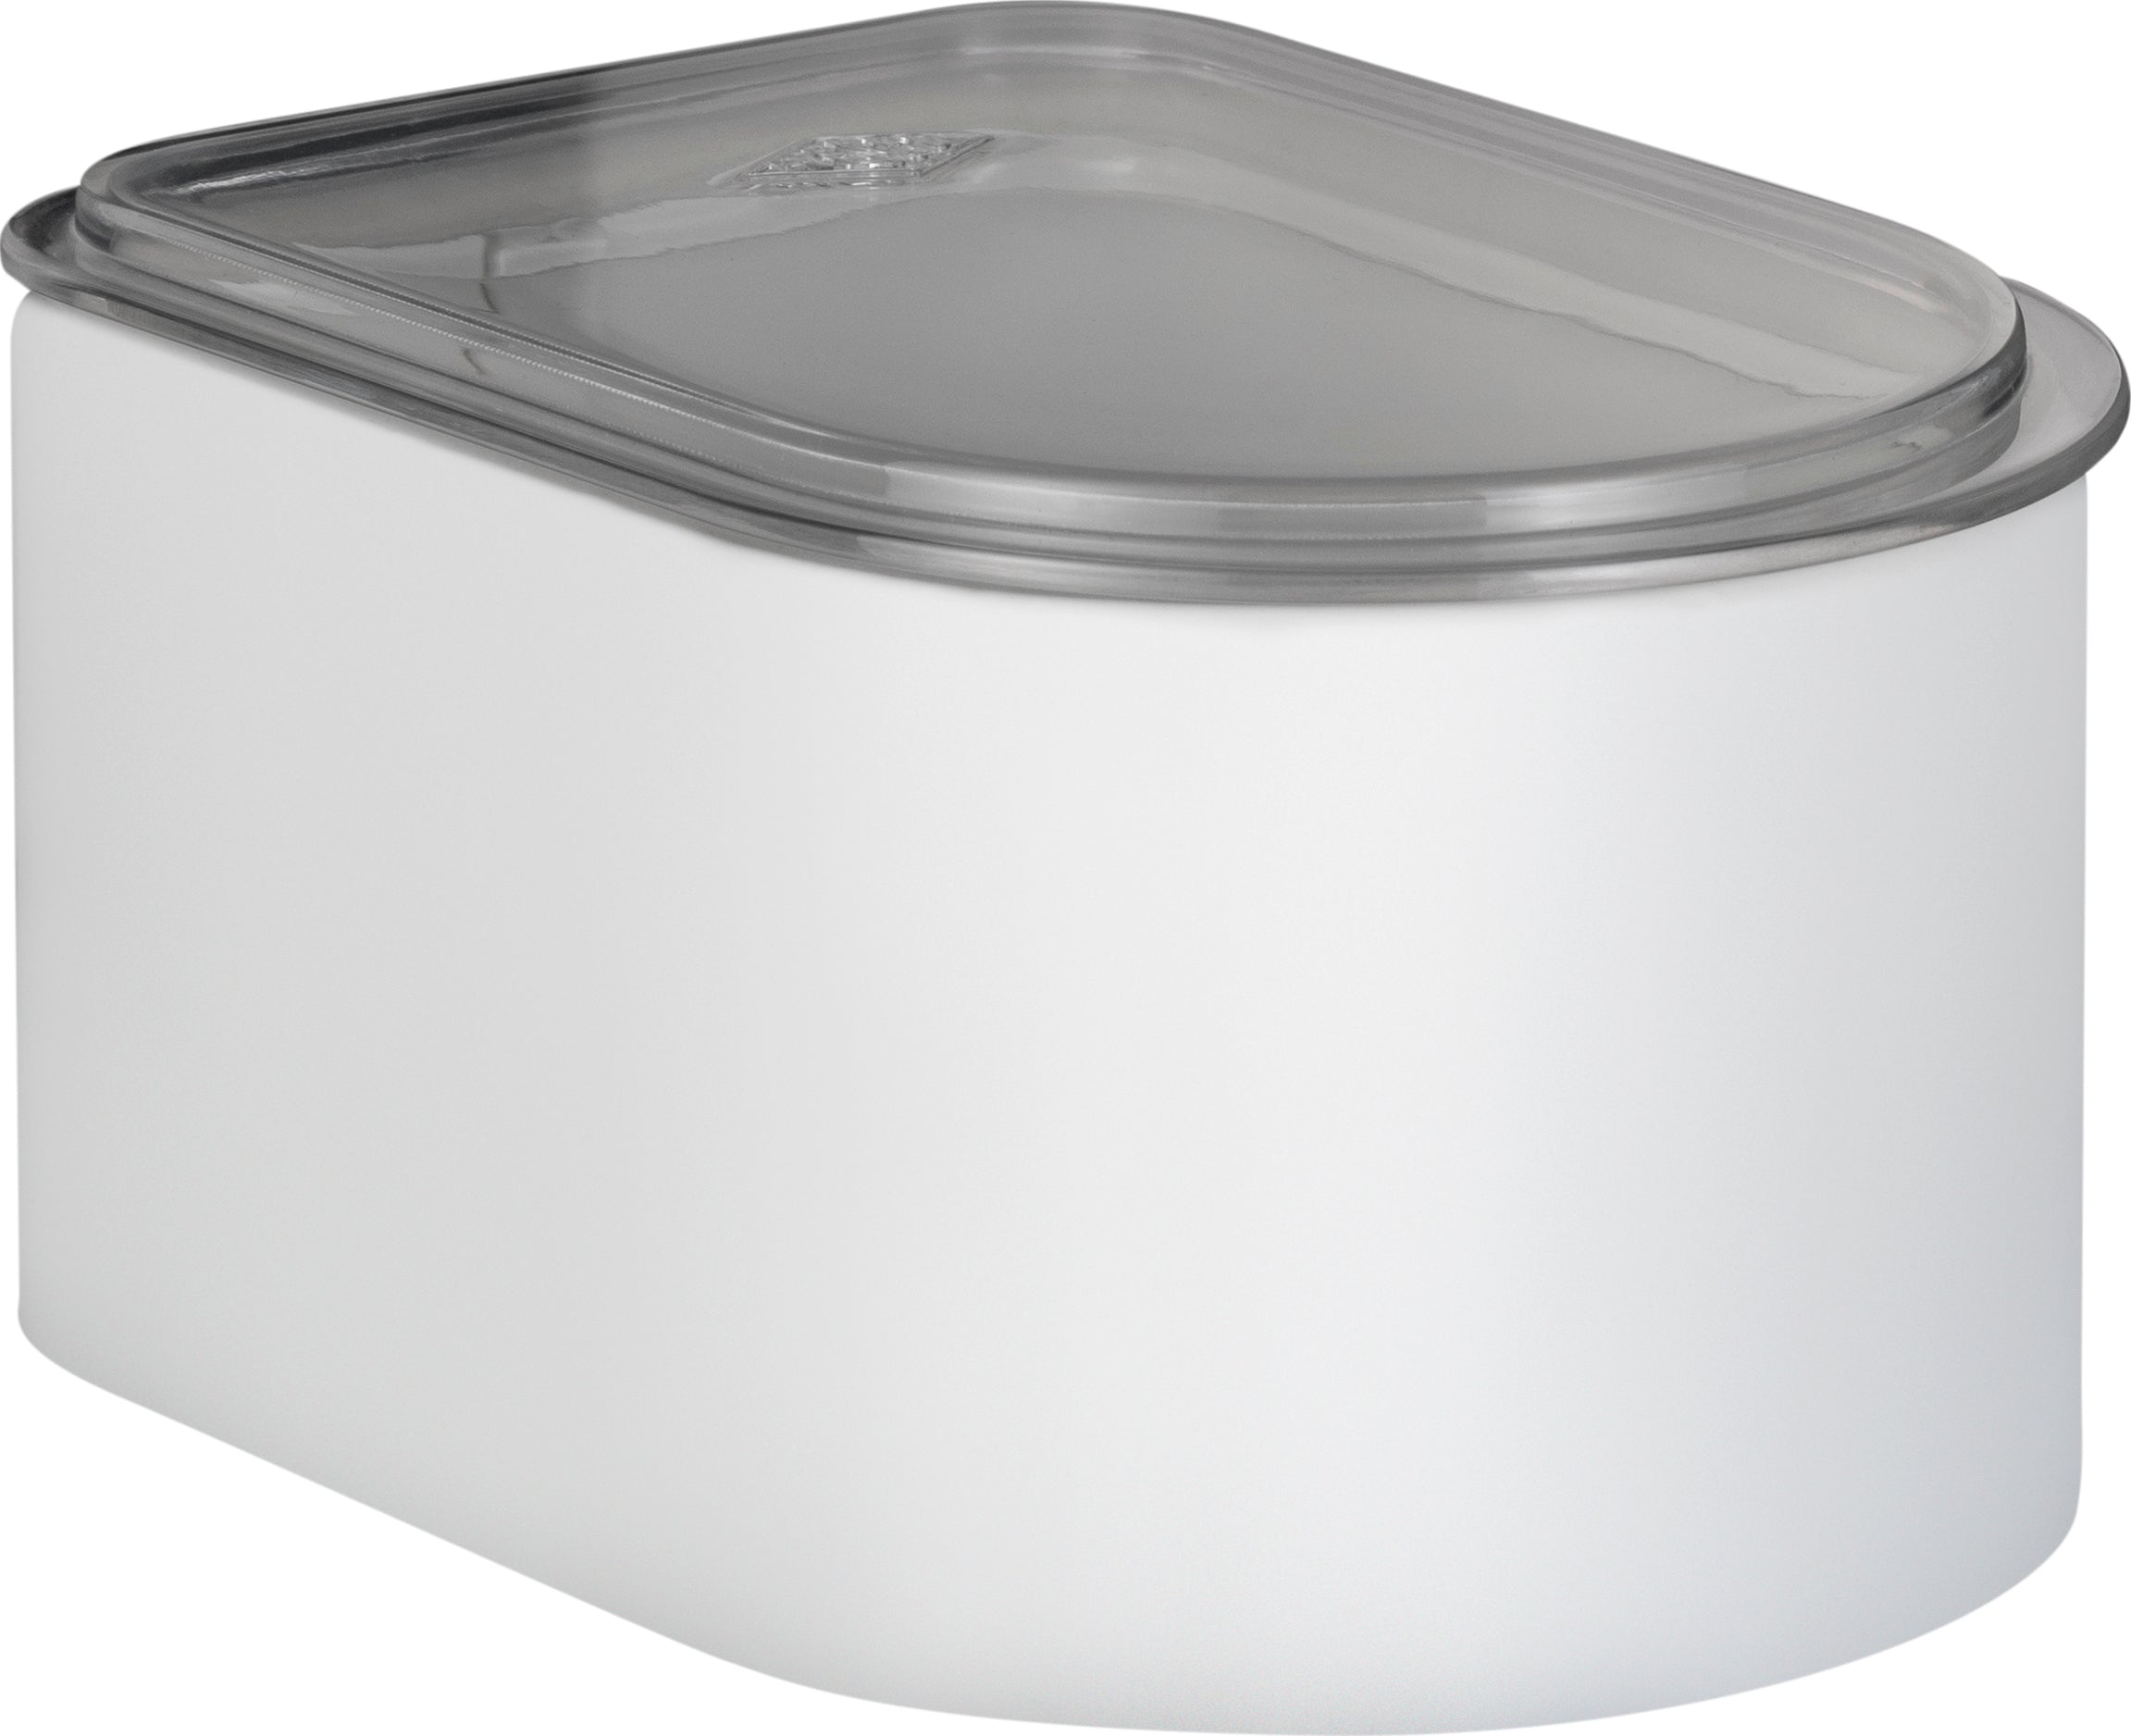 Wesco Canister 1 Litre With Acrylic Lid, White Matt